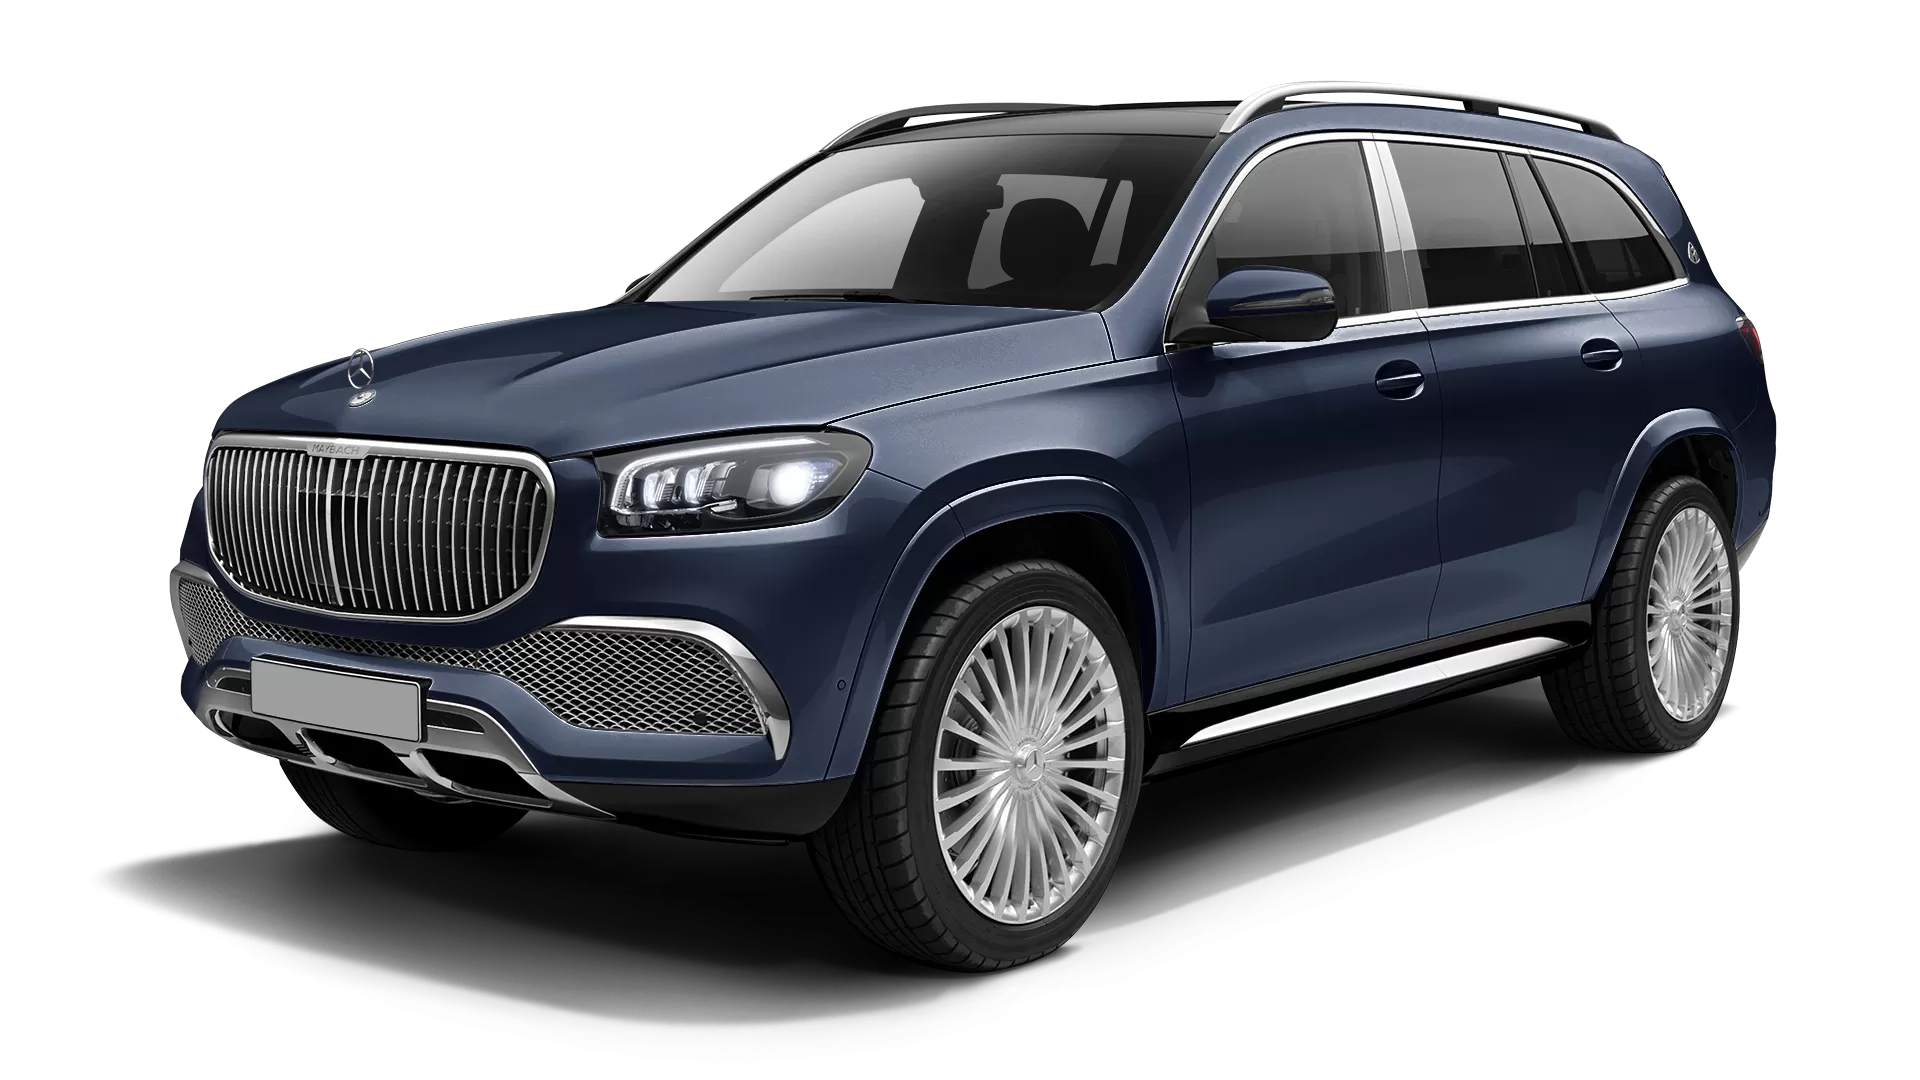 Mercedes Maybach GLS 600 stock front view in Cavansite Blue color